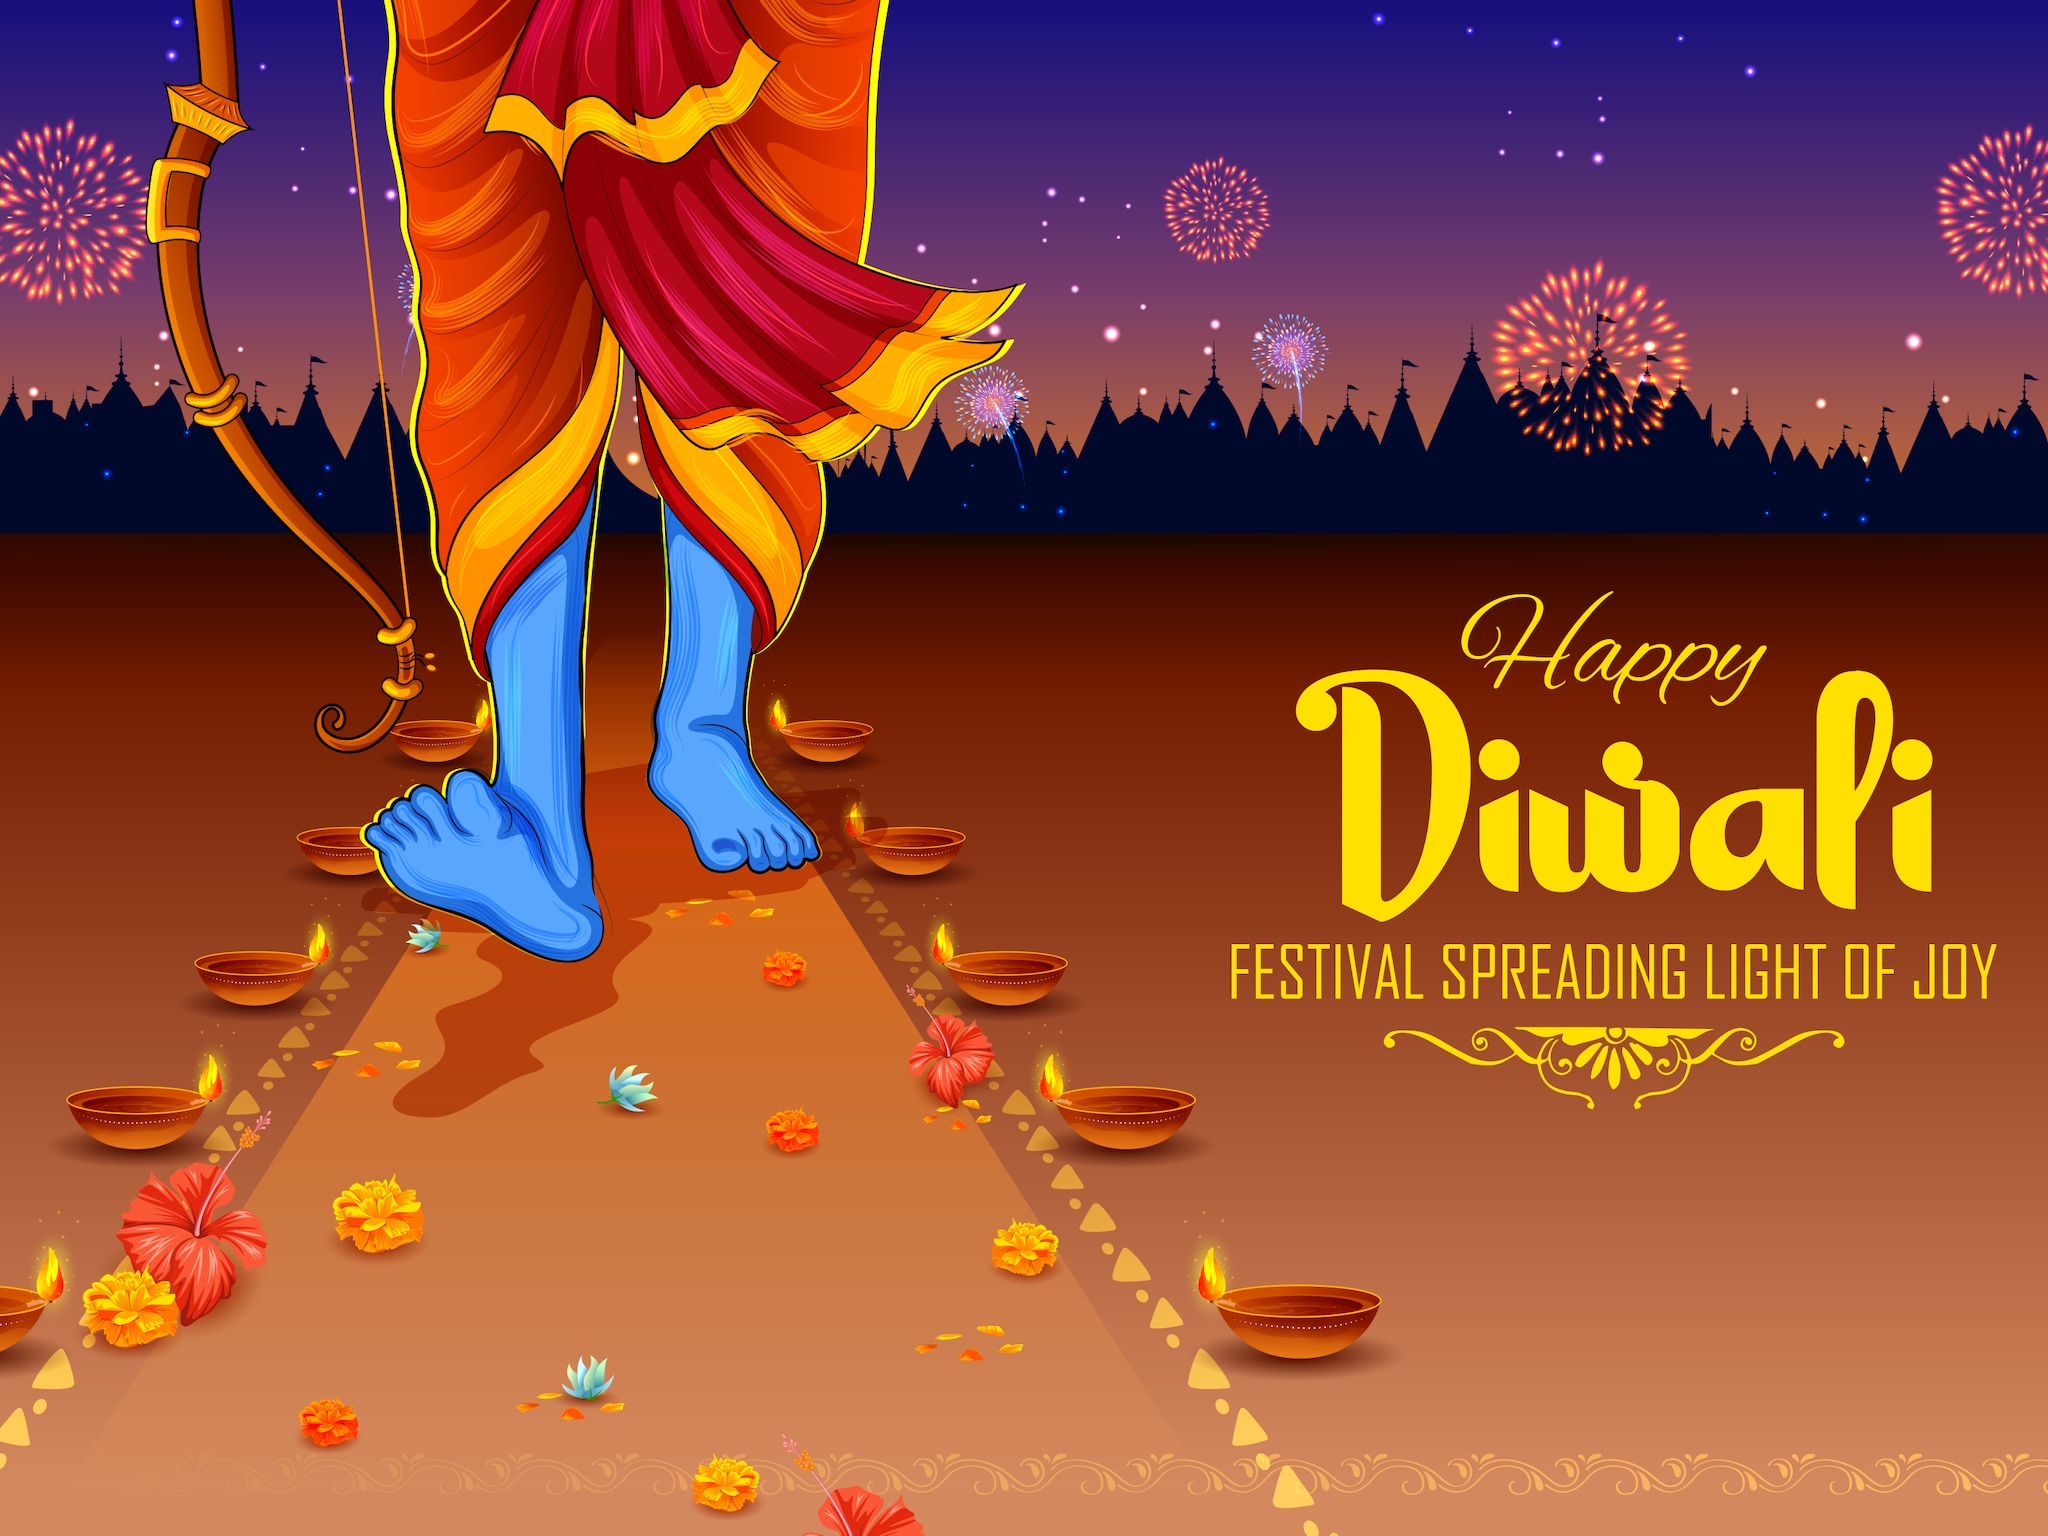 This festival is celebrated to commemorate the victory of Lord Rama over the demon-king Ravana and his return to Ayodhya.  (Representative image: Shutterstock)